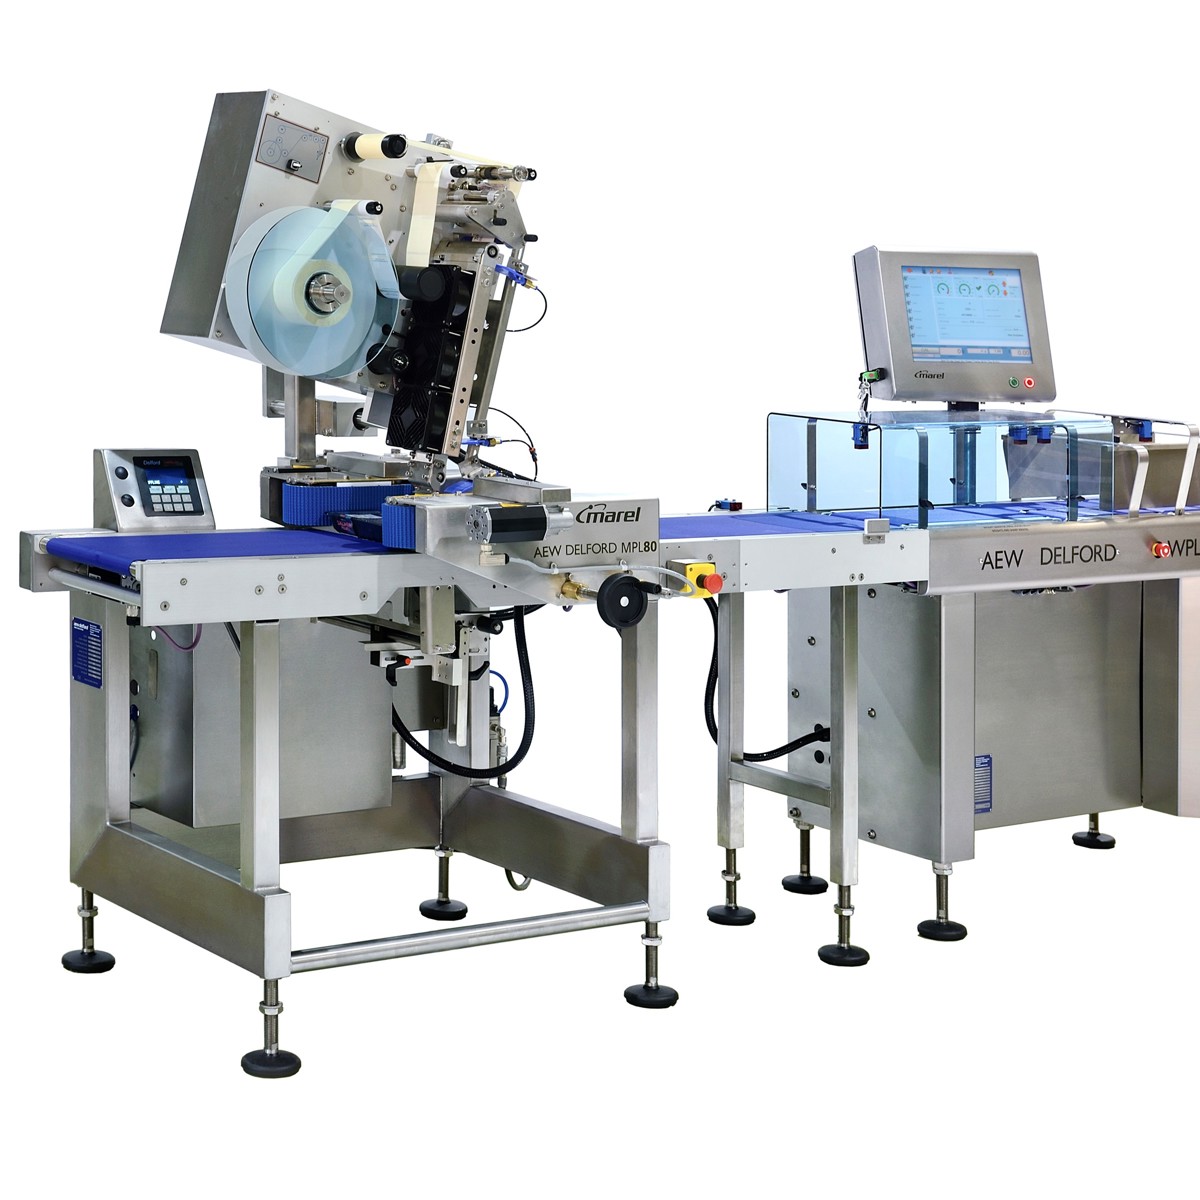 Automatic weigh-price labelling machines